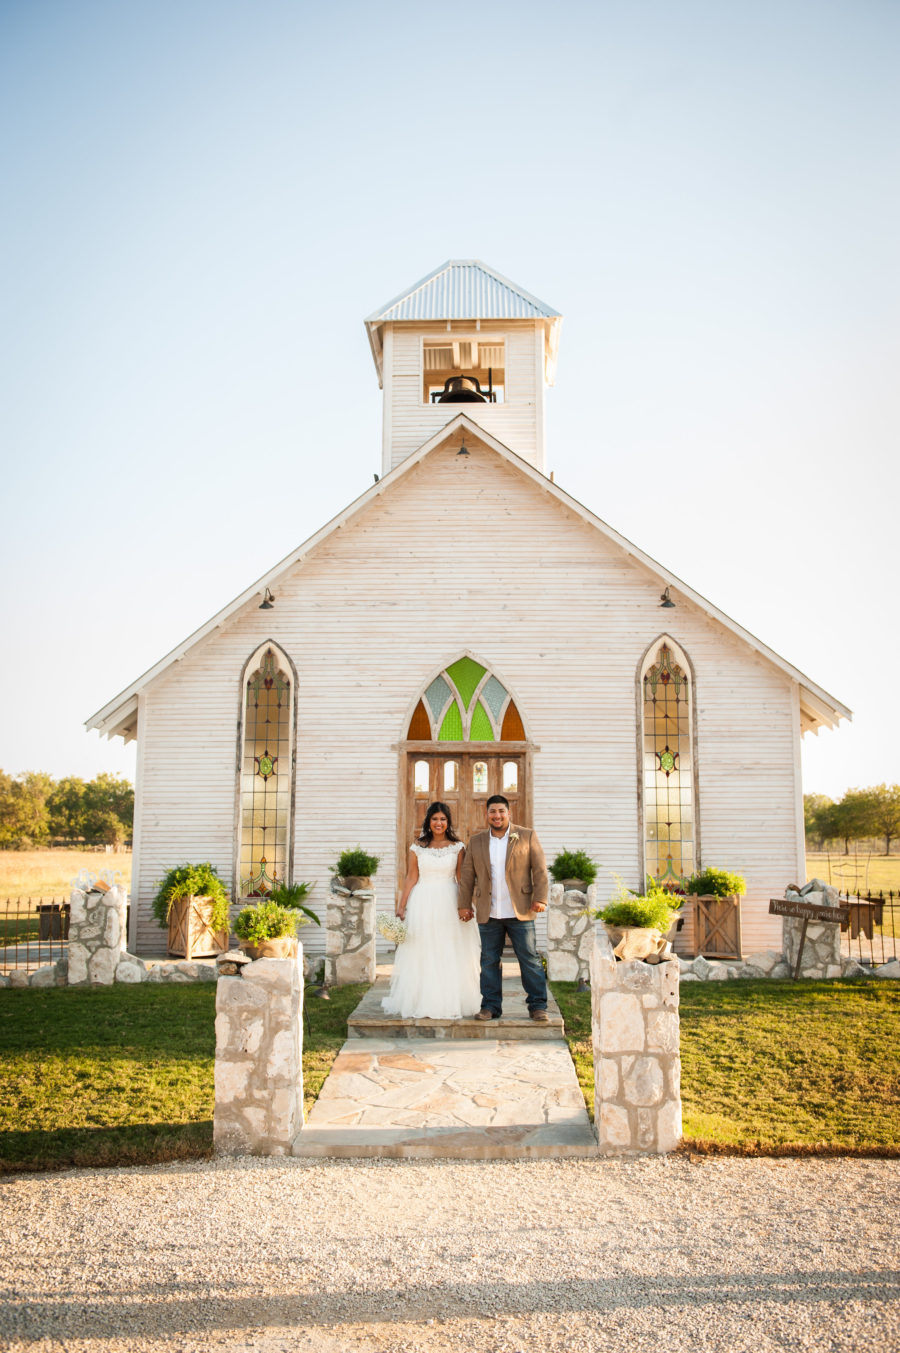 Our Country Wedding – New Braunfels, TX